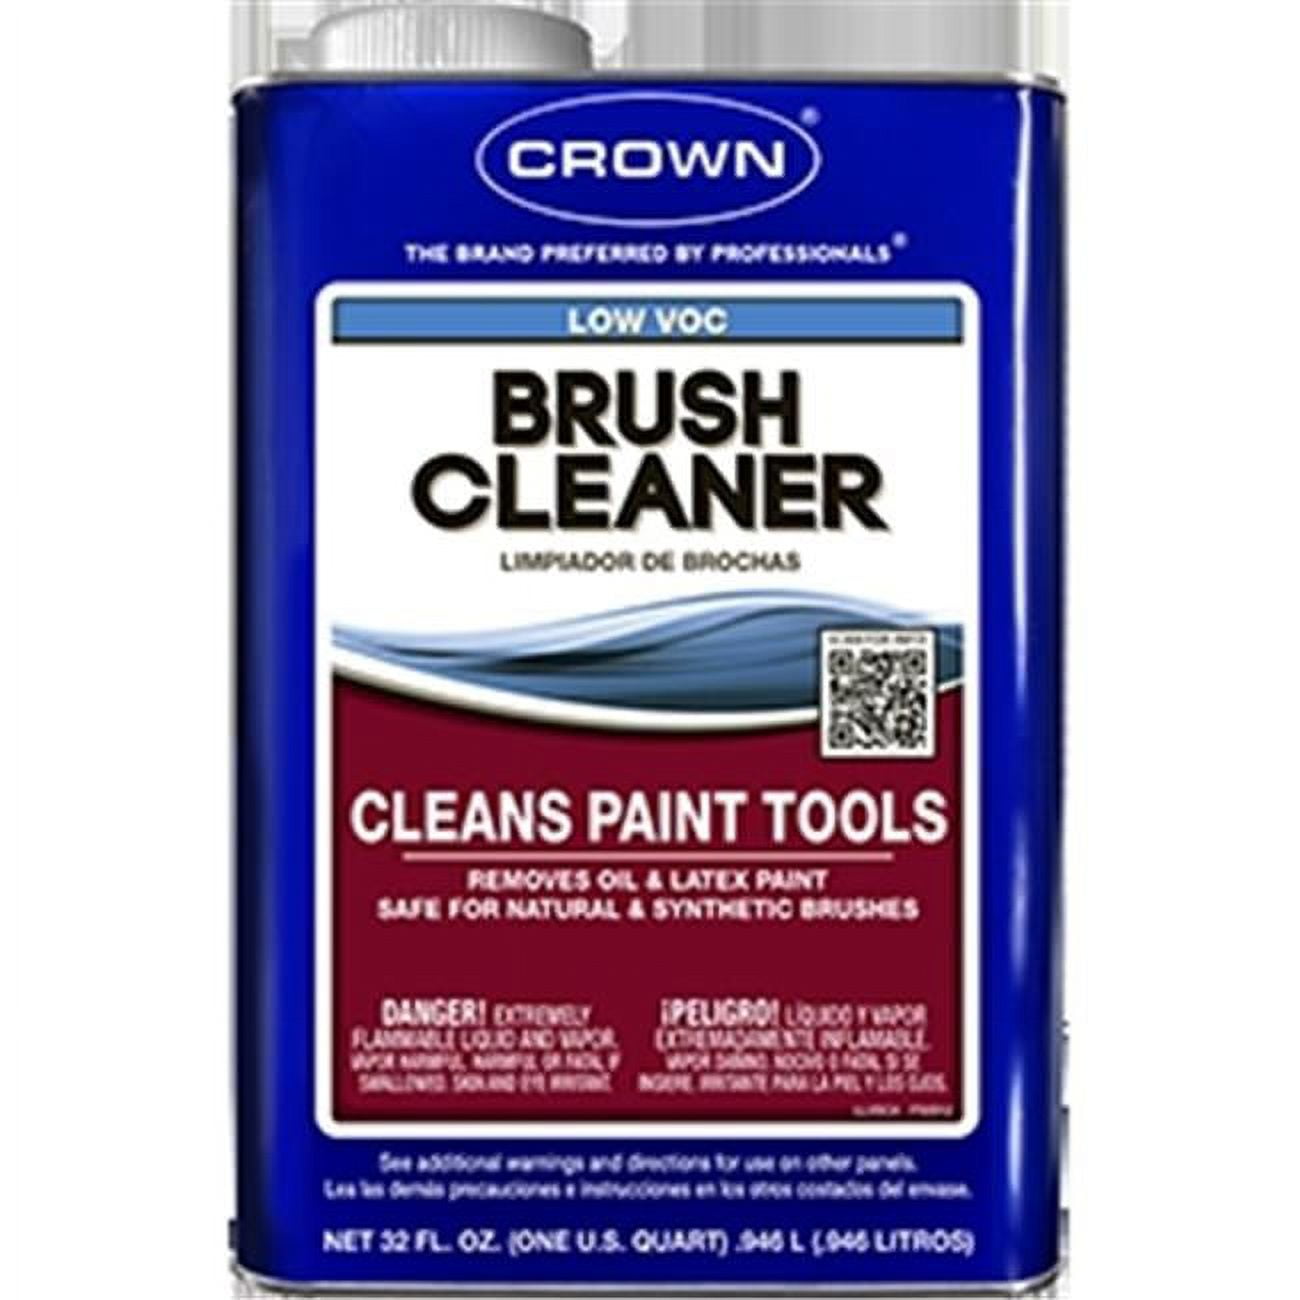 Jasco 32-fl oz Fast to Dissolve Paint Thinner in the Paint